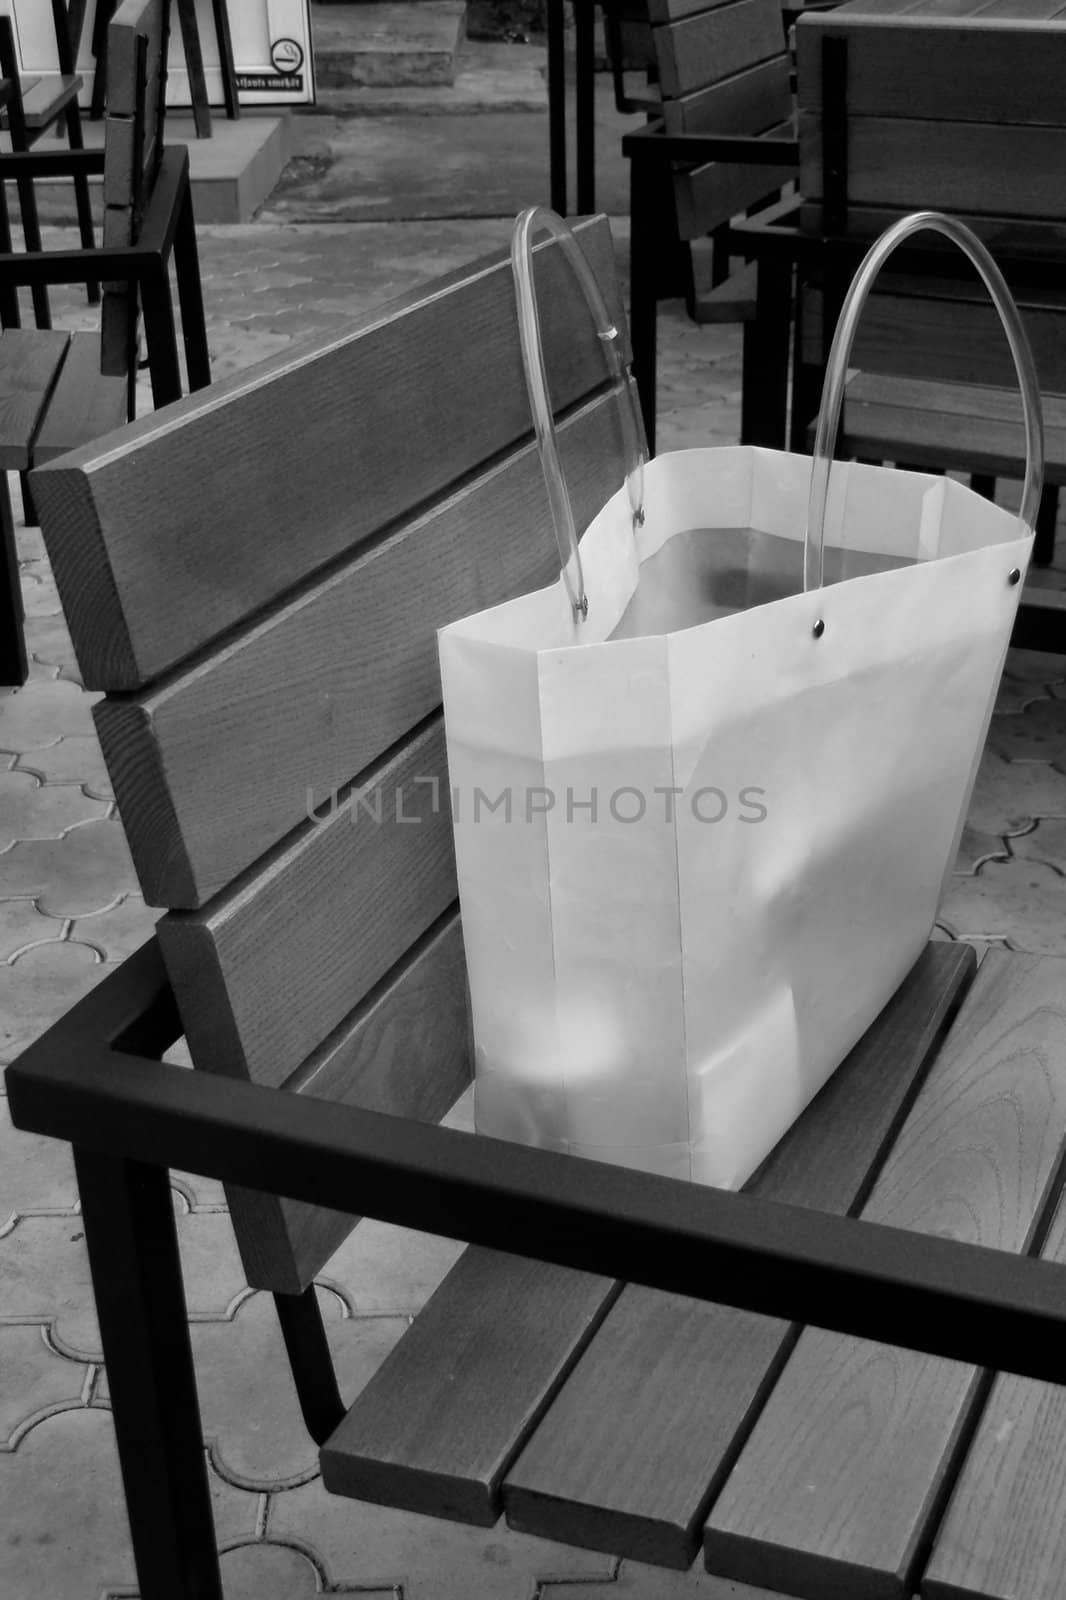 leaving behind bag on the chair
